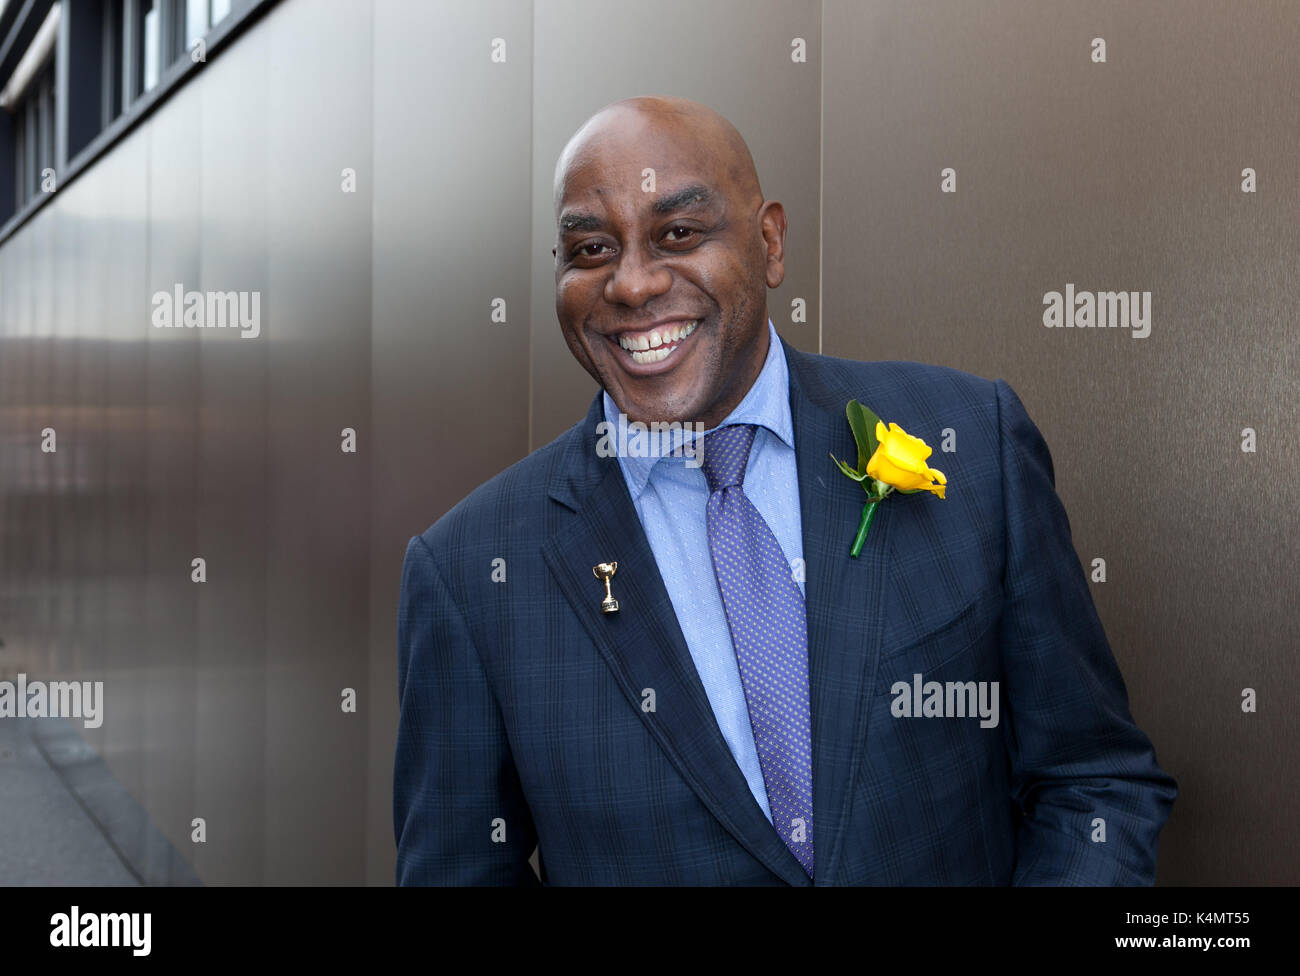 Ainsley Harriott at the Melbourne Cup, November 6, 2012. Stock Photo